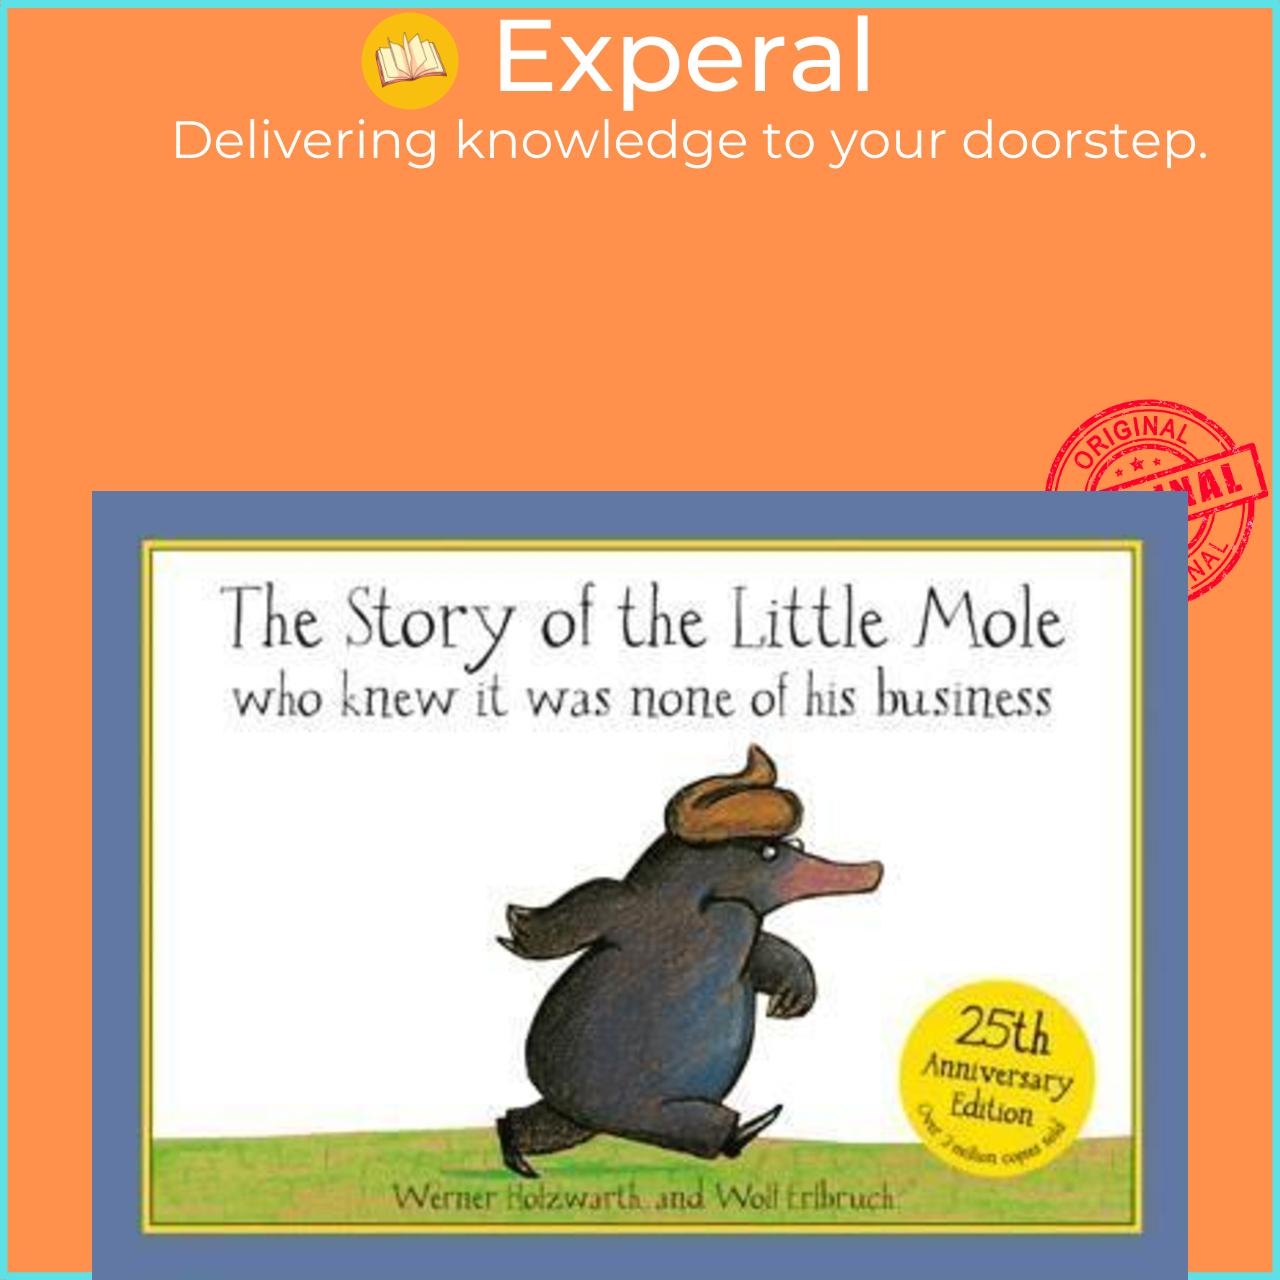 Sách - The Story of the Little Mole who knew it was none of his business : 3 by Werner Holzwarth (UK edition, paperback)